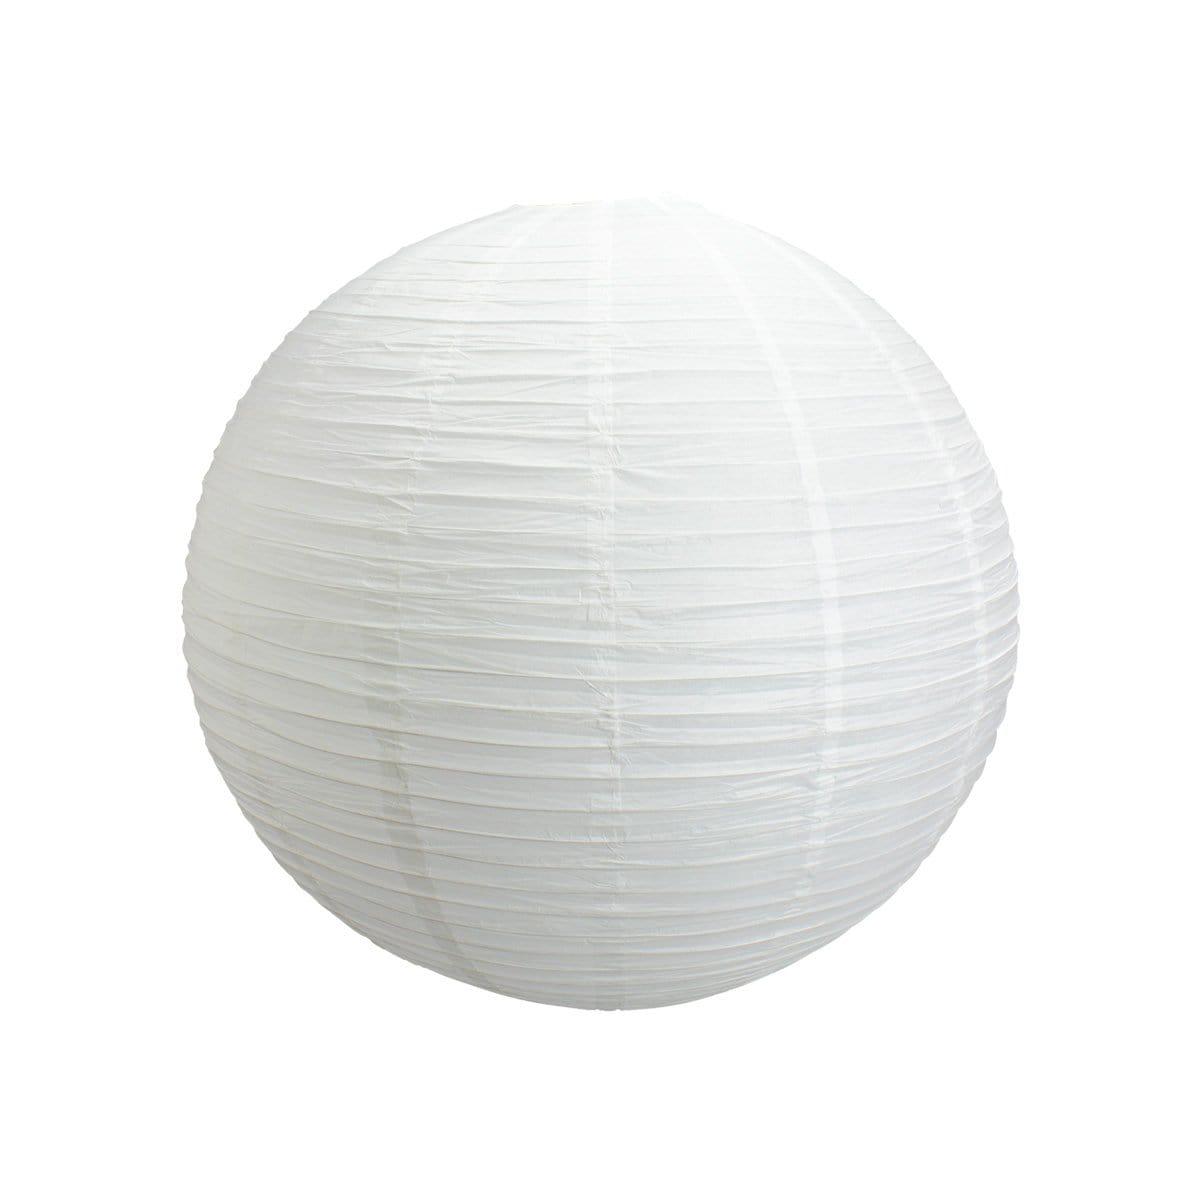 Buy Decorations Paper Lantern - White 18 in. sold at Party Expert